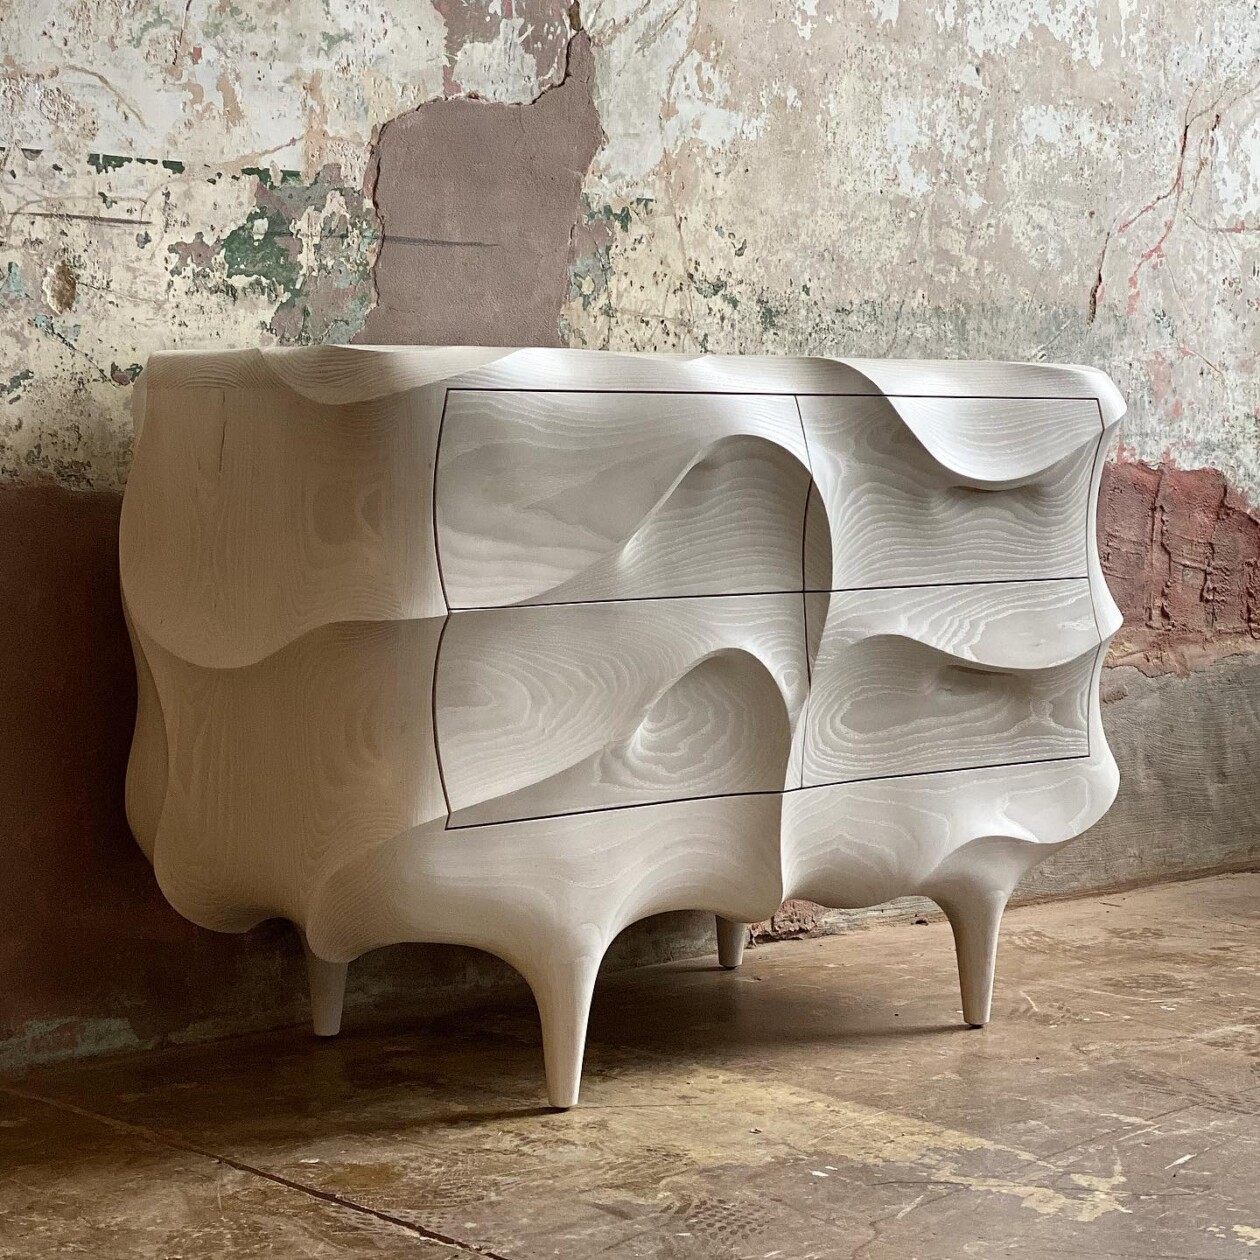 Intricately Engraved And Textured Organic Shaped Furniture By Caleb Woodard (12)